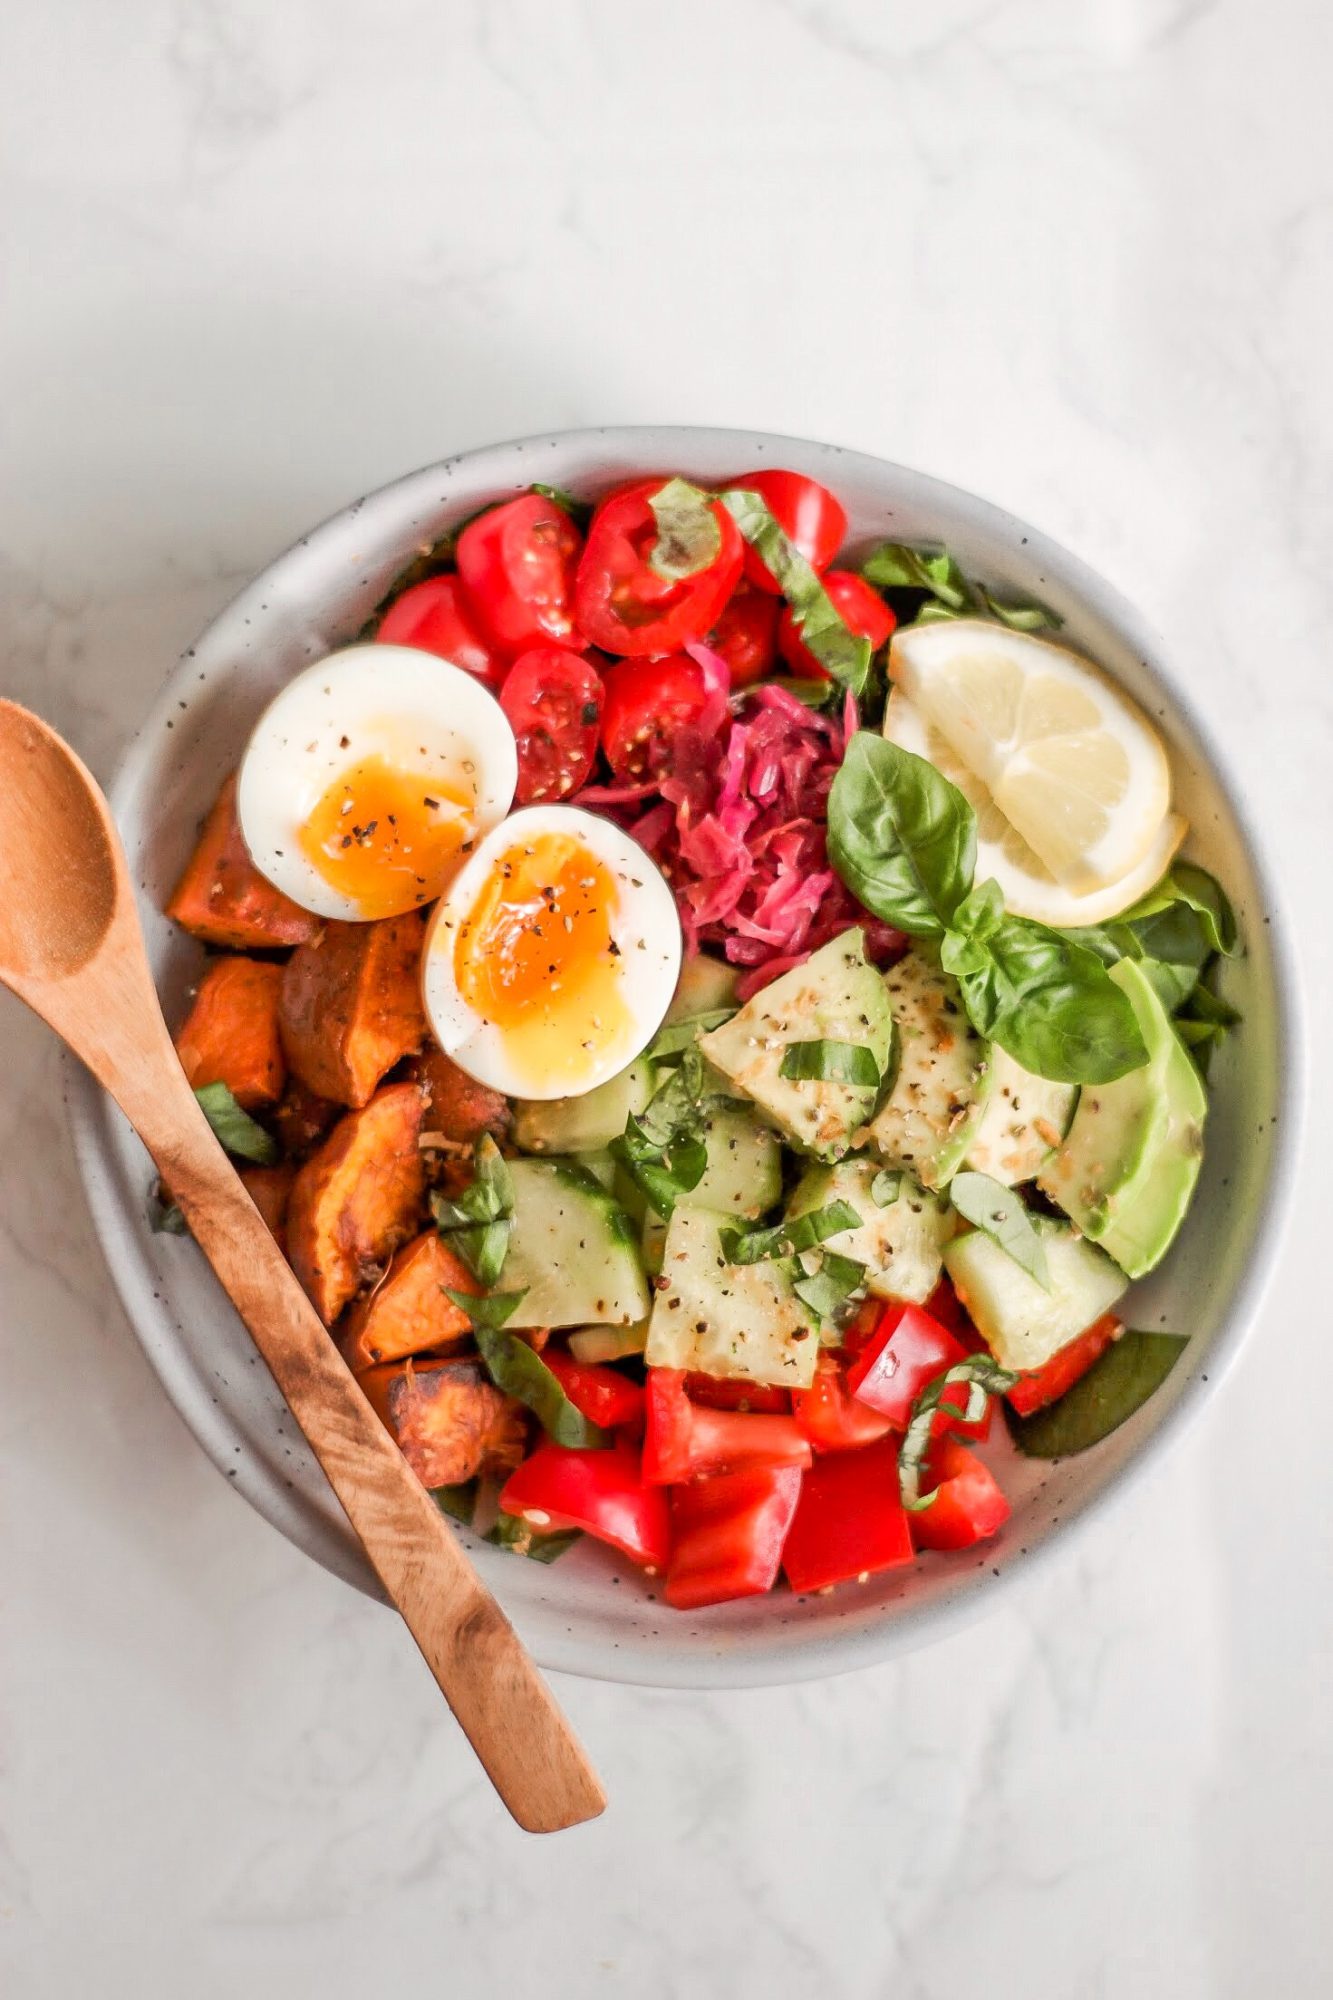 Healthy Lunch Salad Recipe: The Rainbow Bowl - The Pure Life